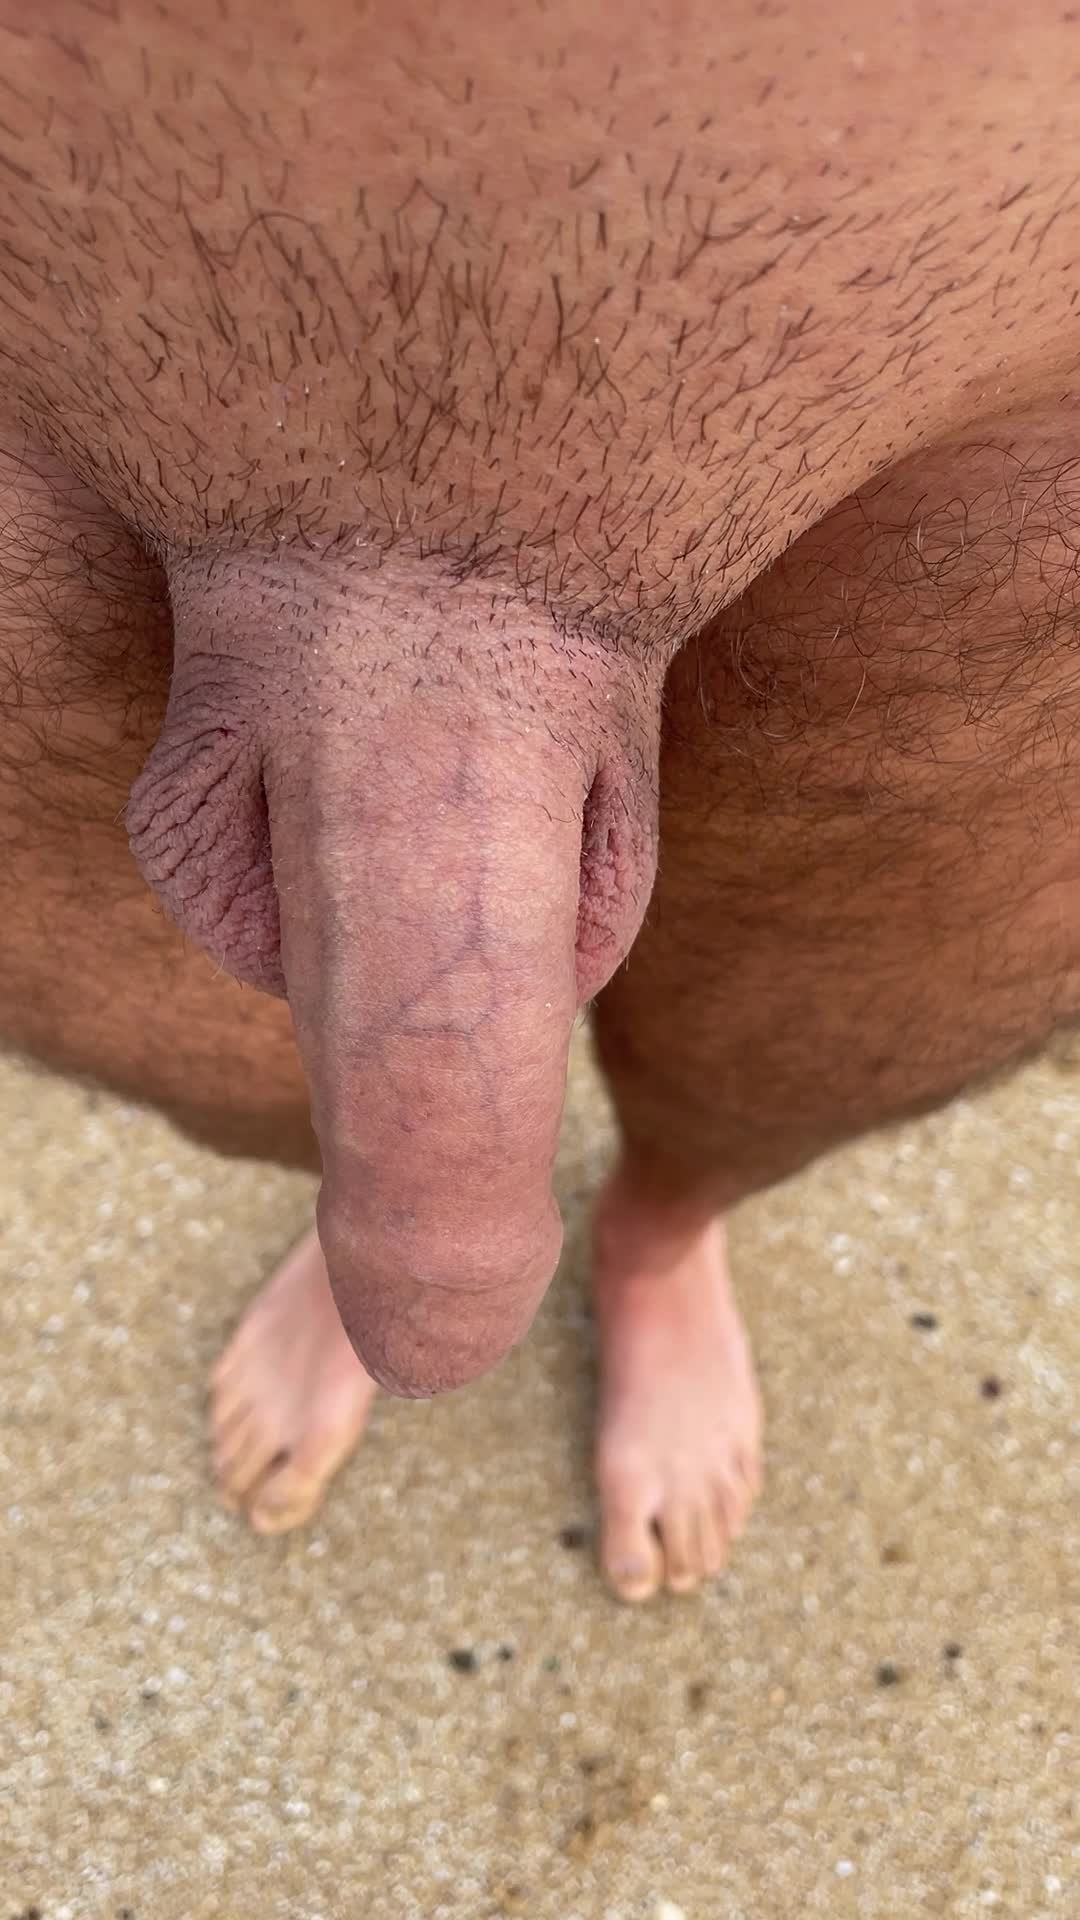 Pissing at the nude beach through my foreskin